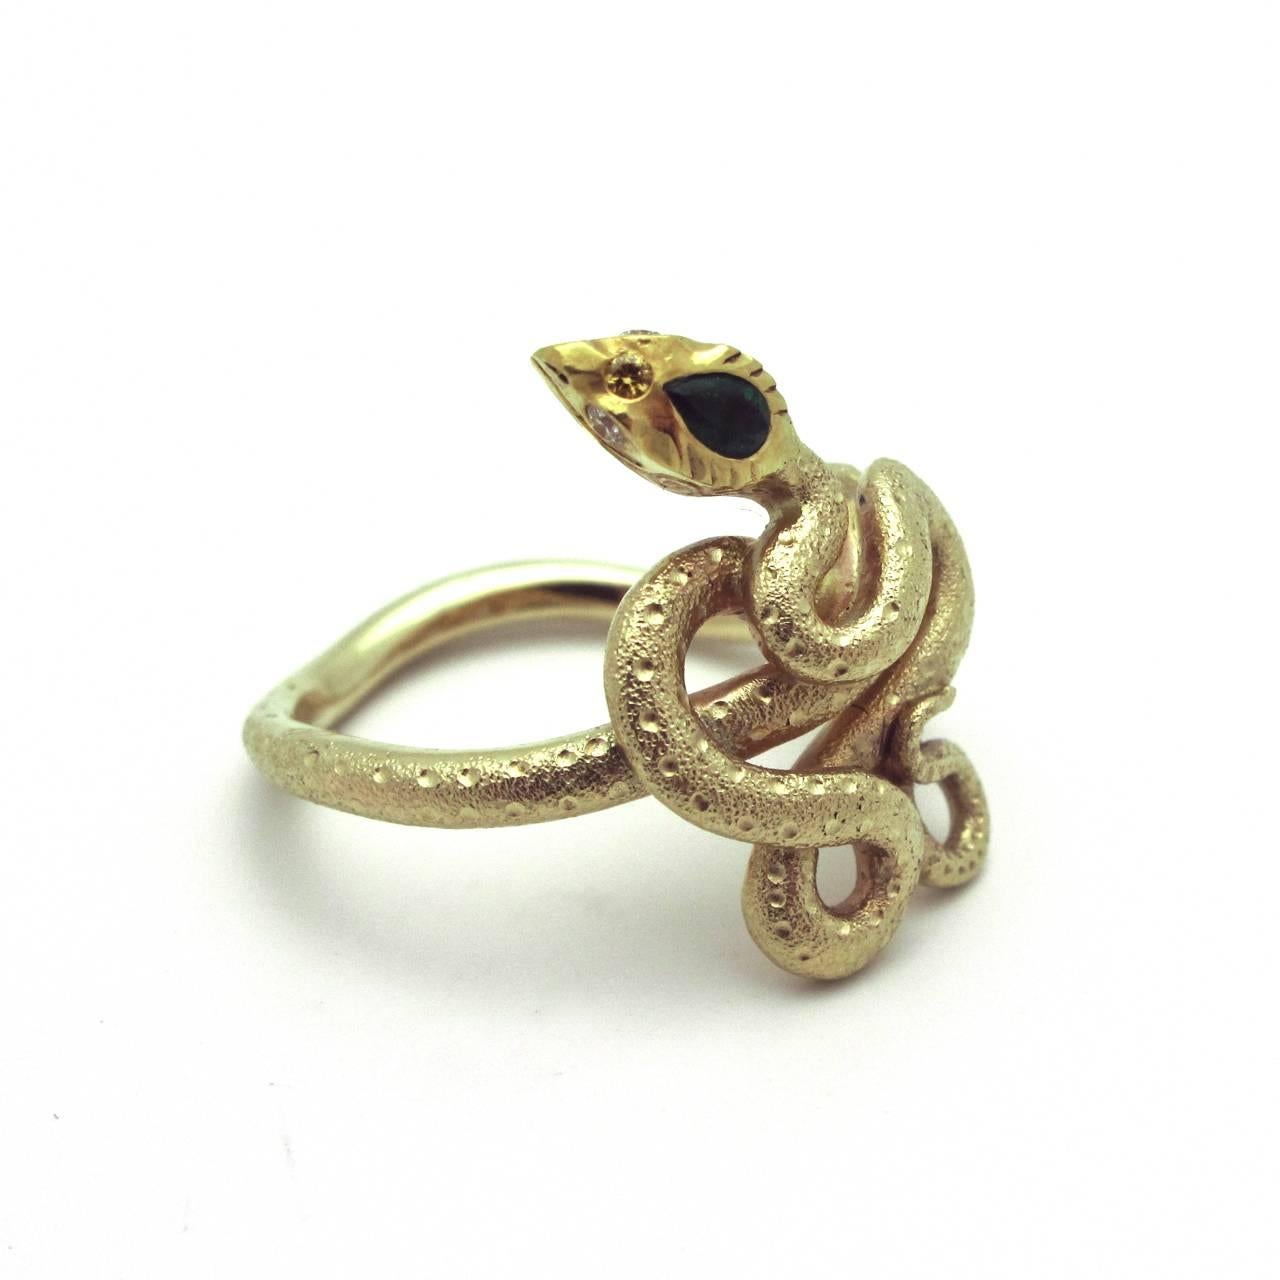 Textured 14k Gold Snake Ring with an 18k Gold and Emerald Head with Diamond Eyes. A great mythical piece with piercing eyes. It is dramatic and mesmerizing.